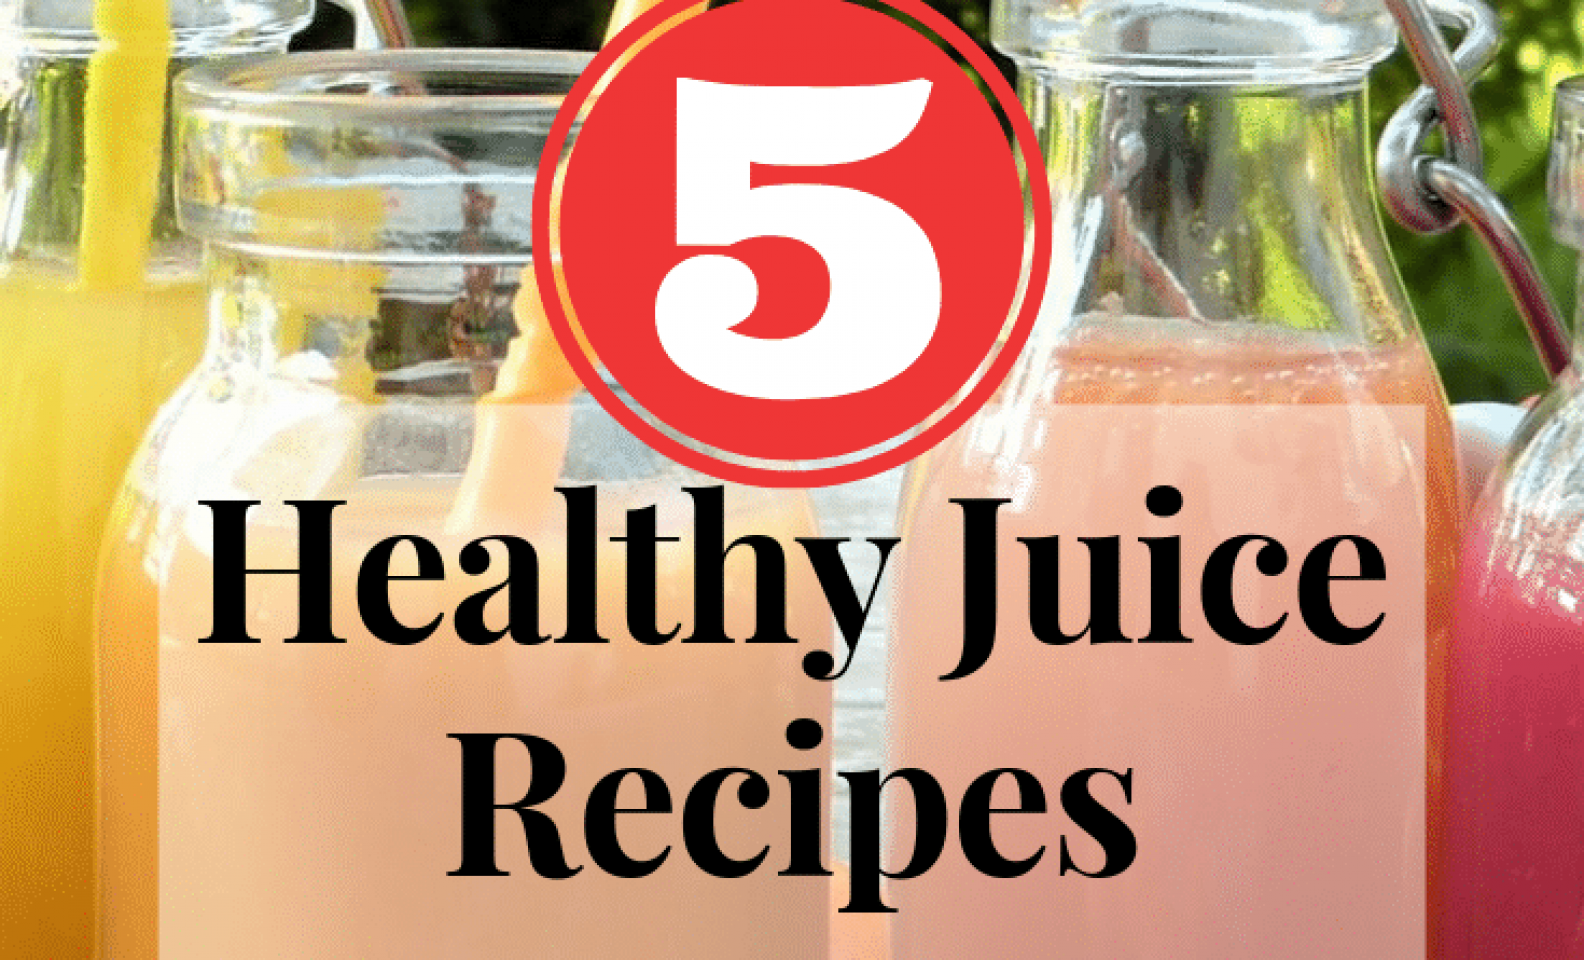 5 Healthy Juice Recipes for Weight Loss & Detoxification